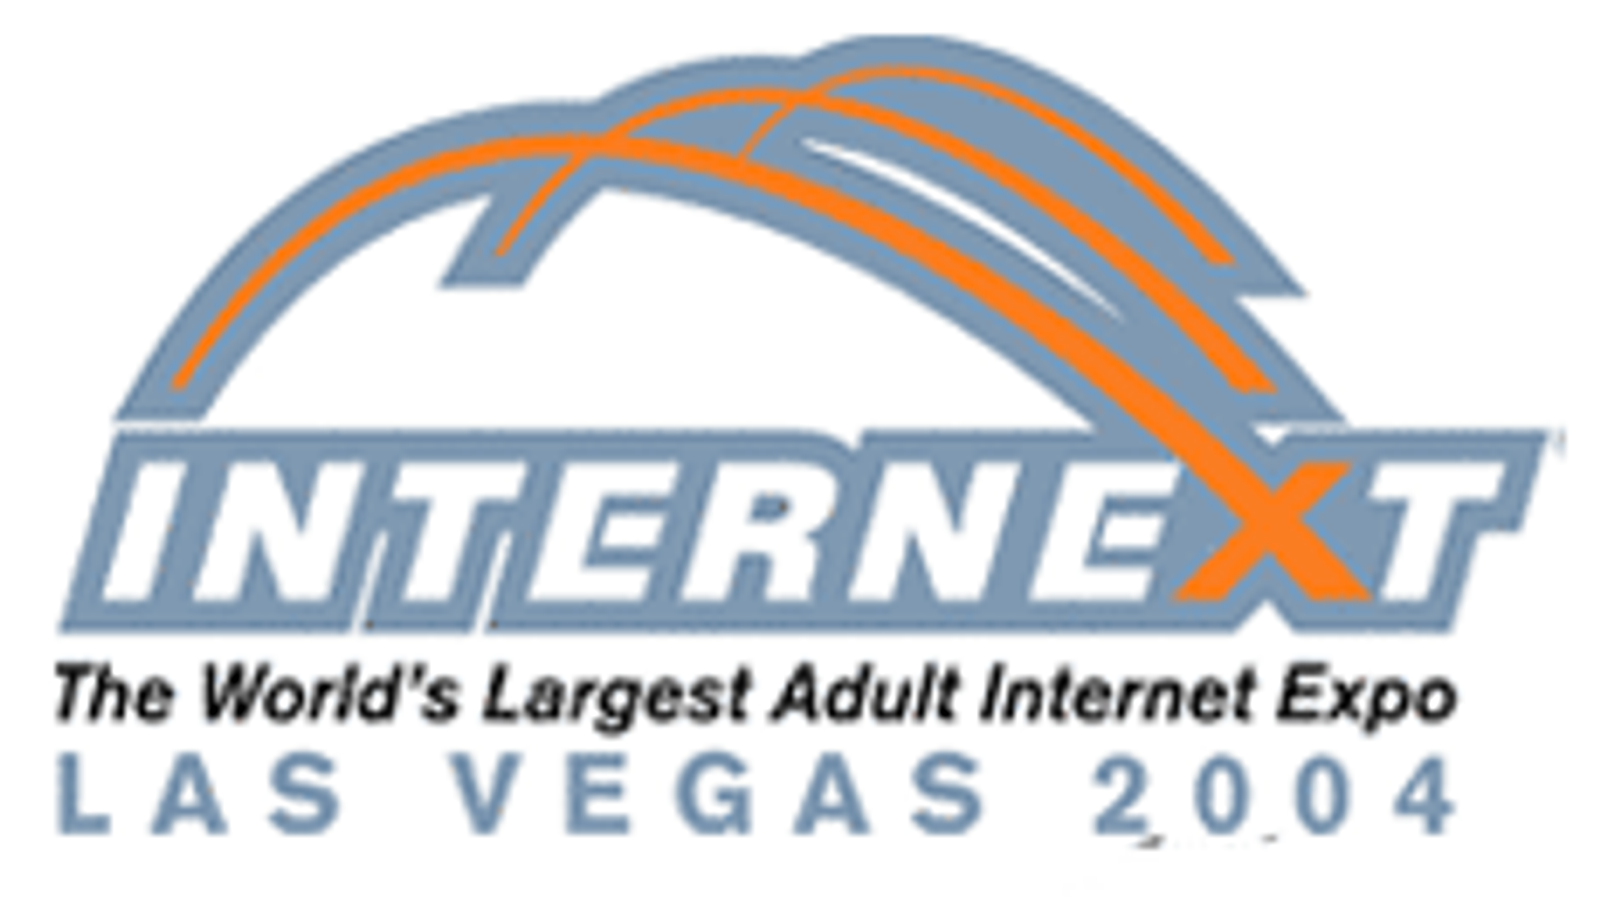 First Day Wrap-up for Internext 2004